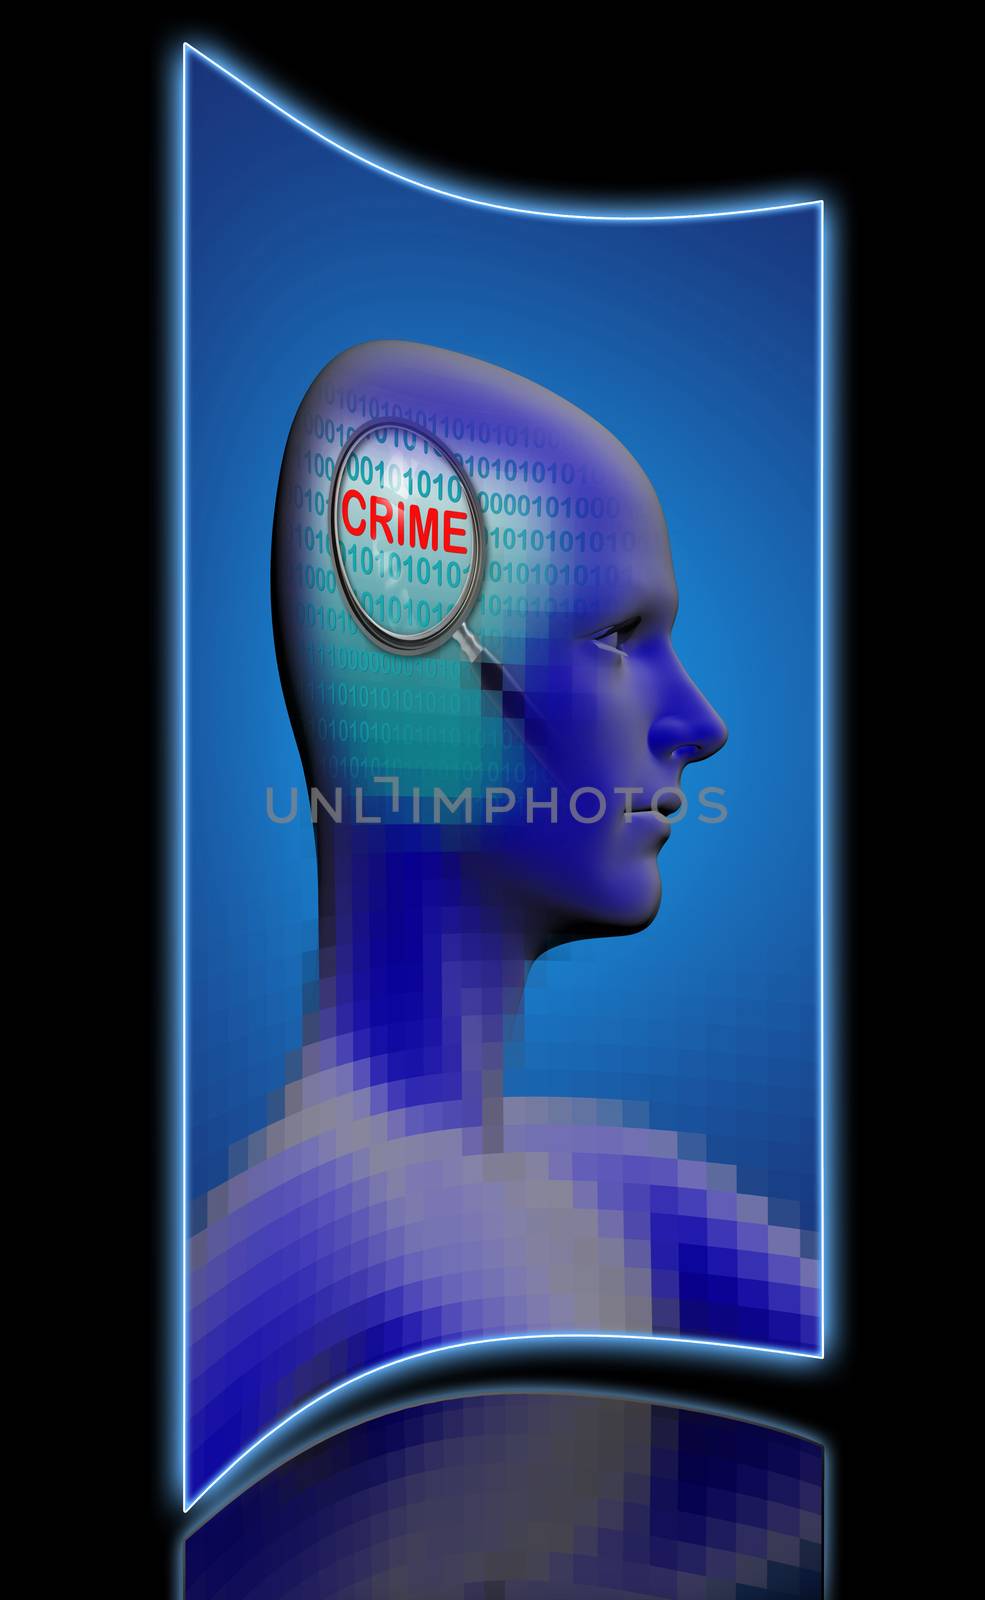 profile of a man with close up of magnifying glass on crime by vitanovski